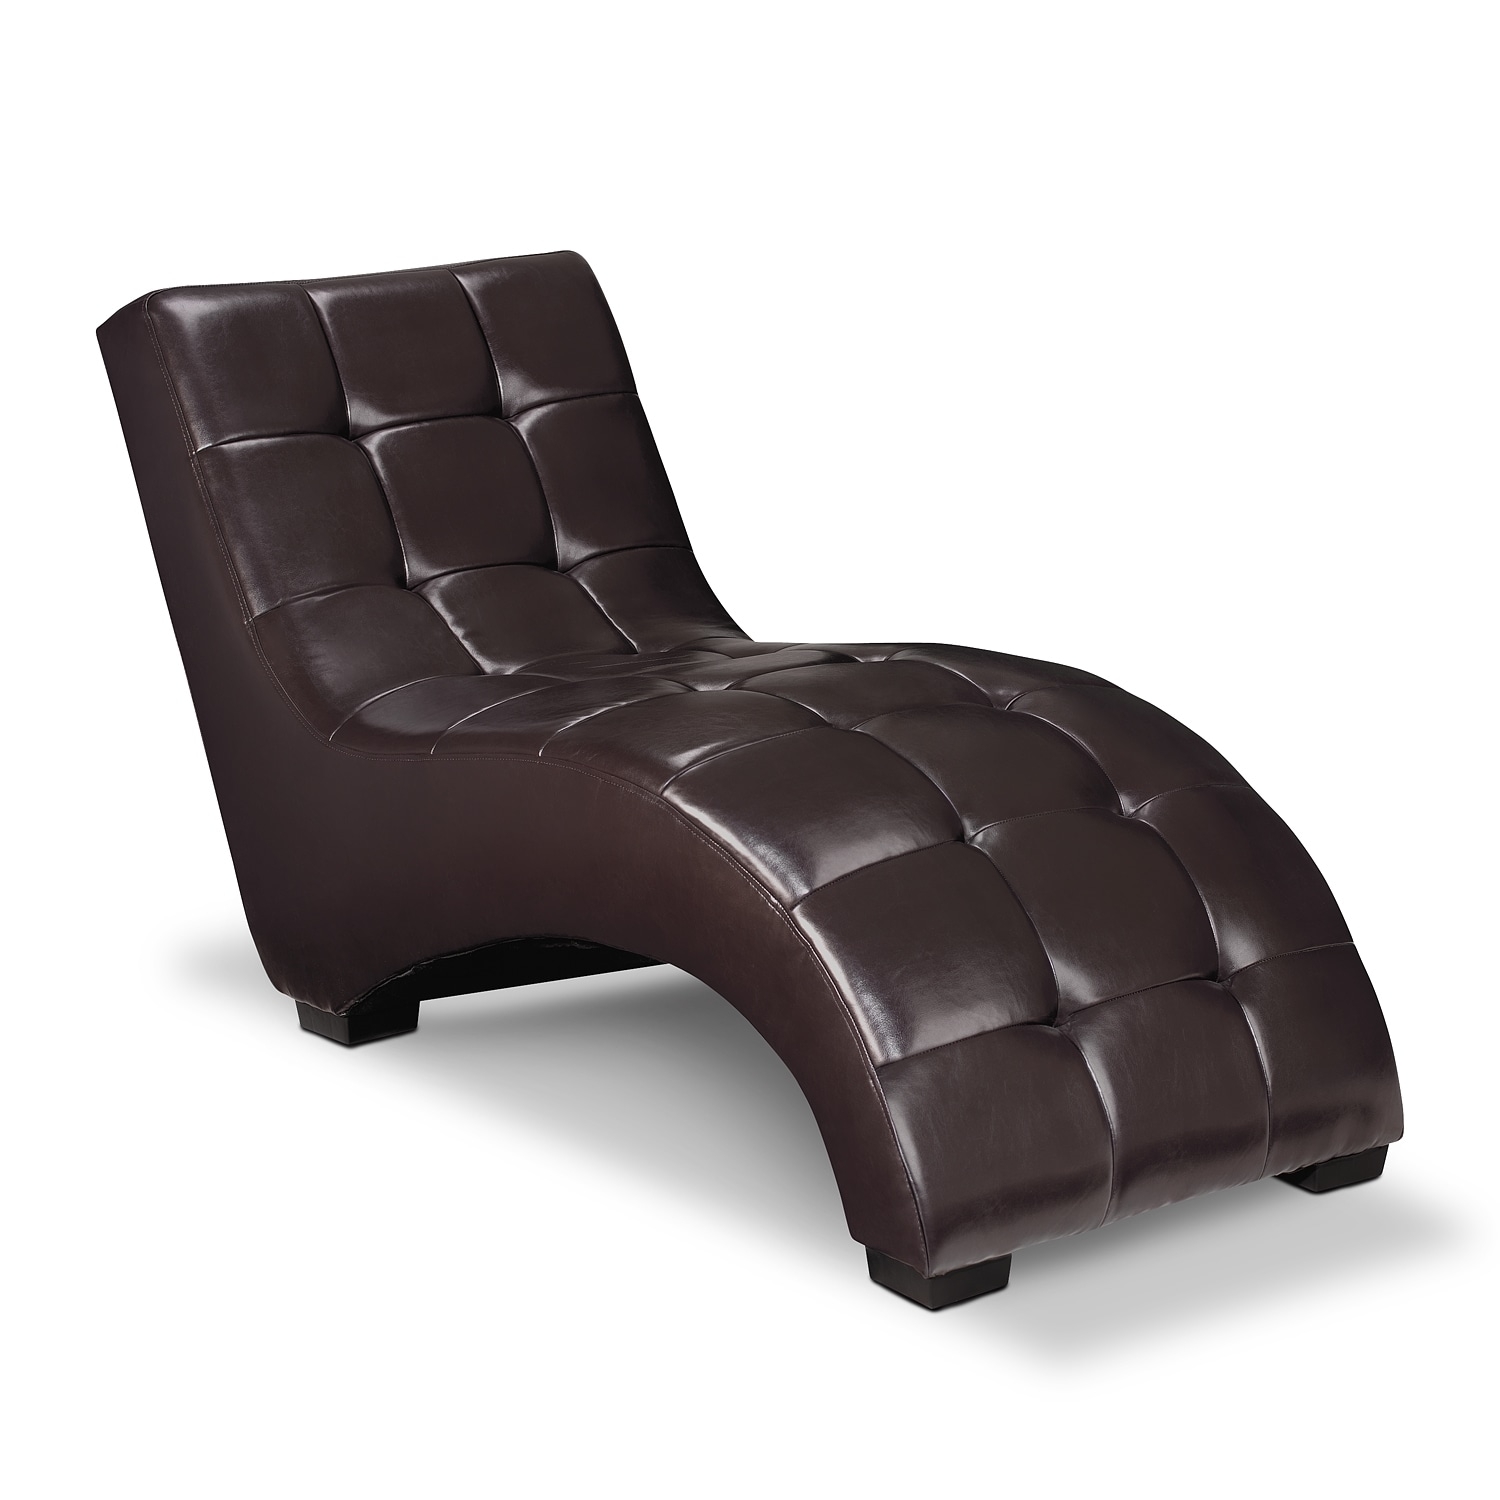 Faux leather chaise lounge 14